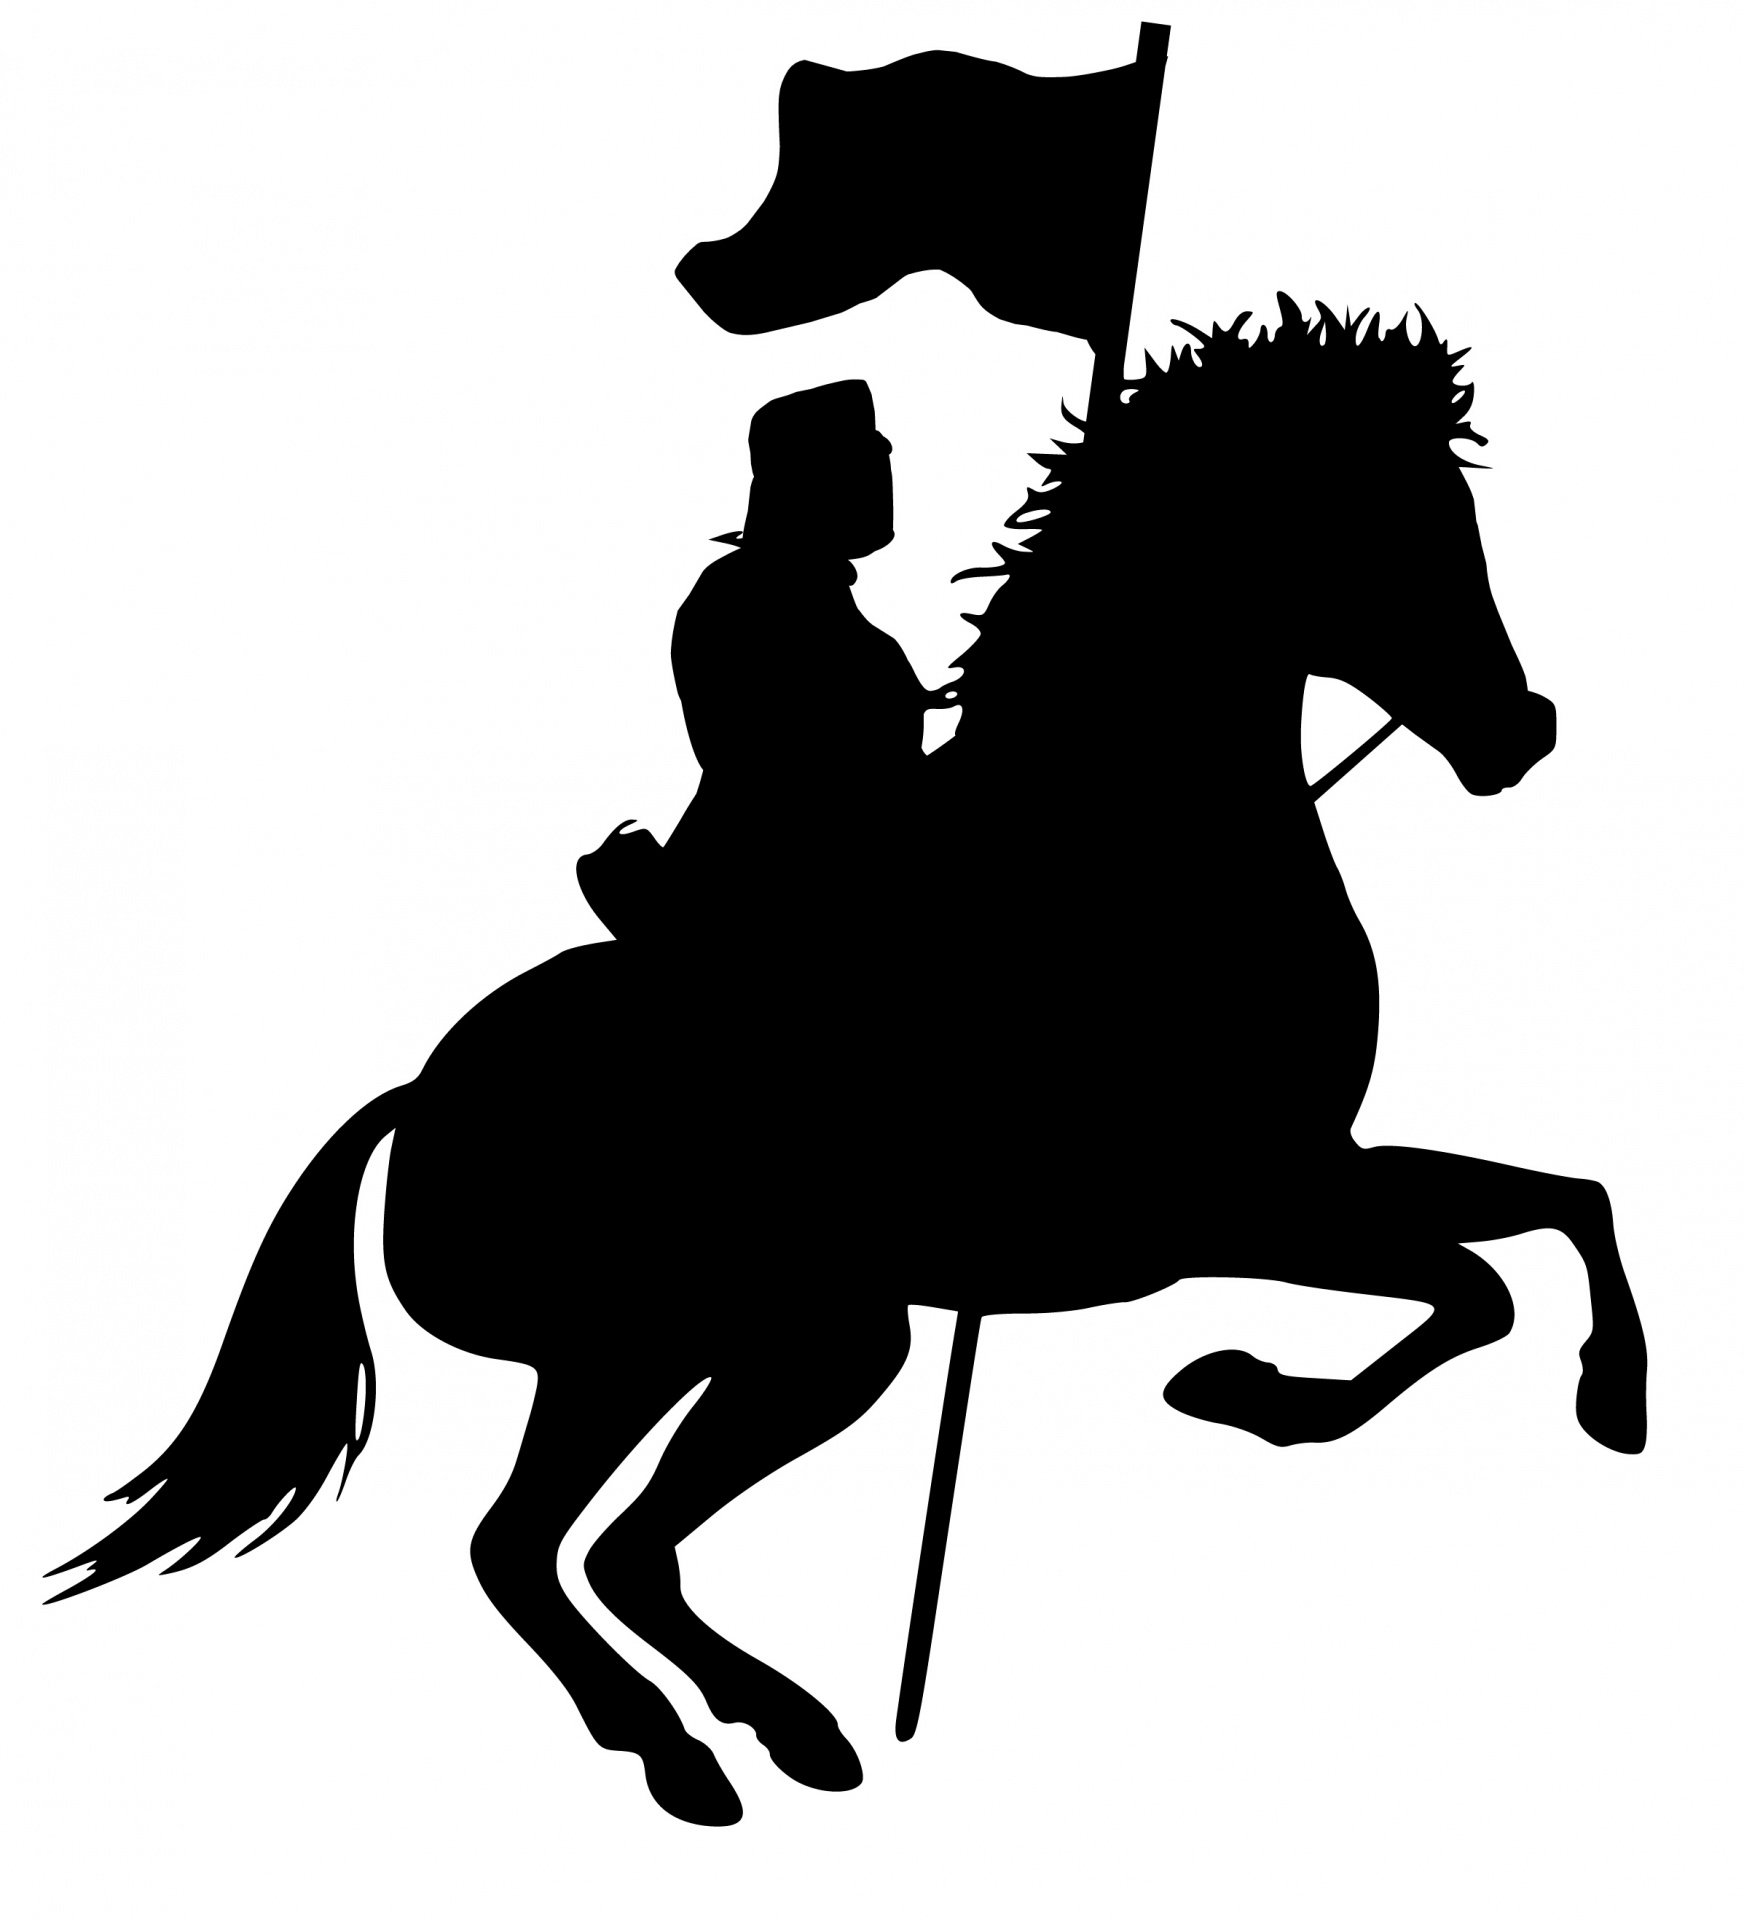 silhouette, warrior, knight, royal warrior, soldier, ancient, fighter, horse, design, armored, clipart,flag,war